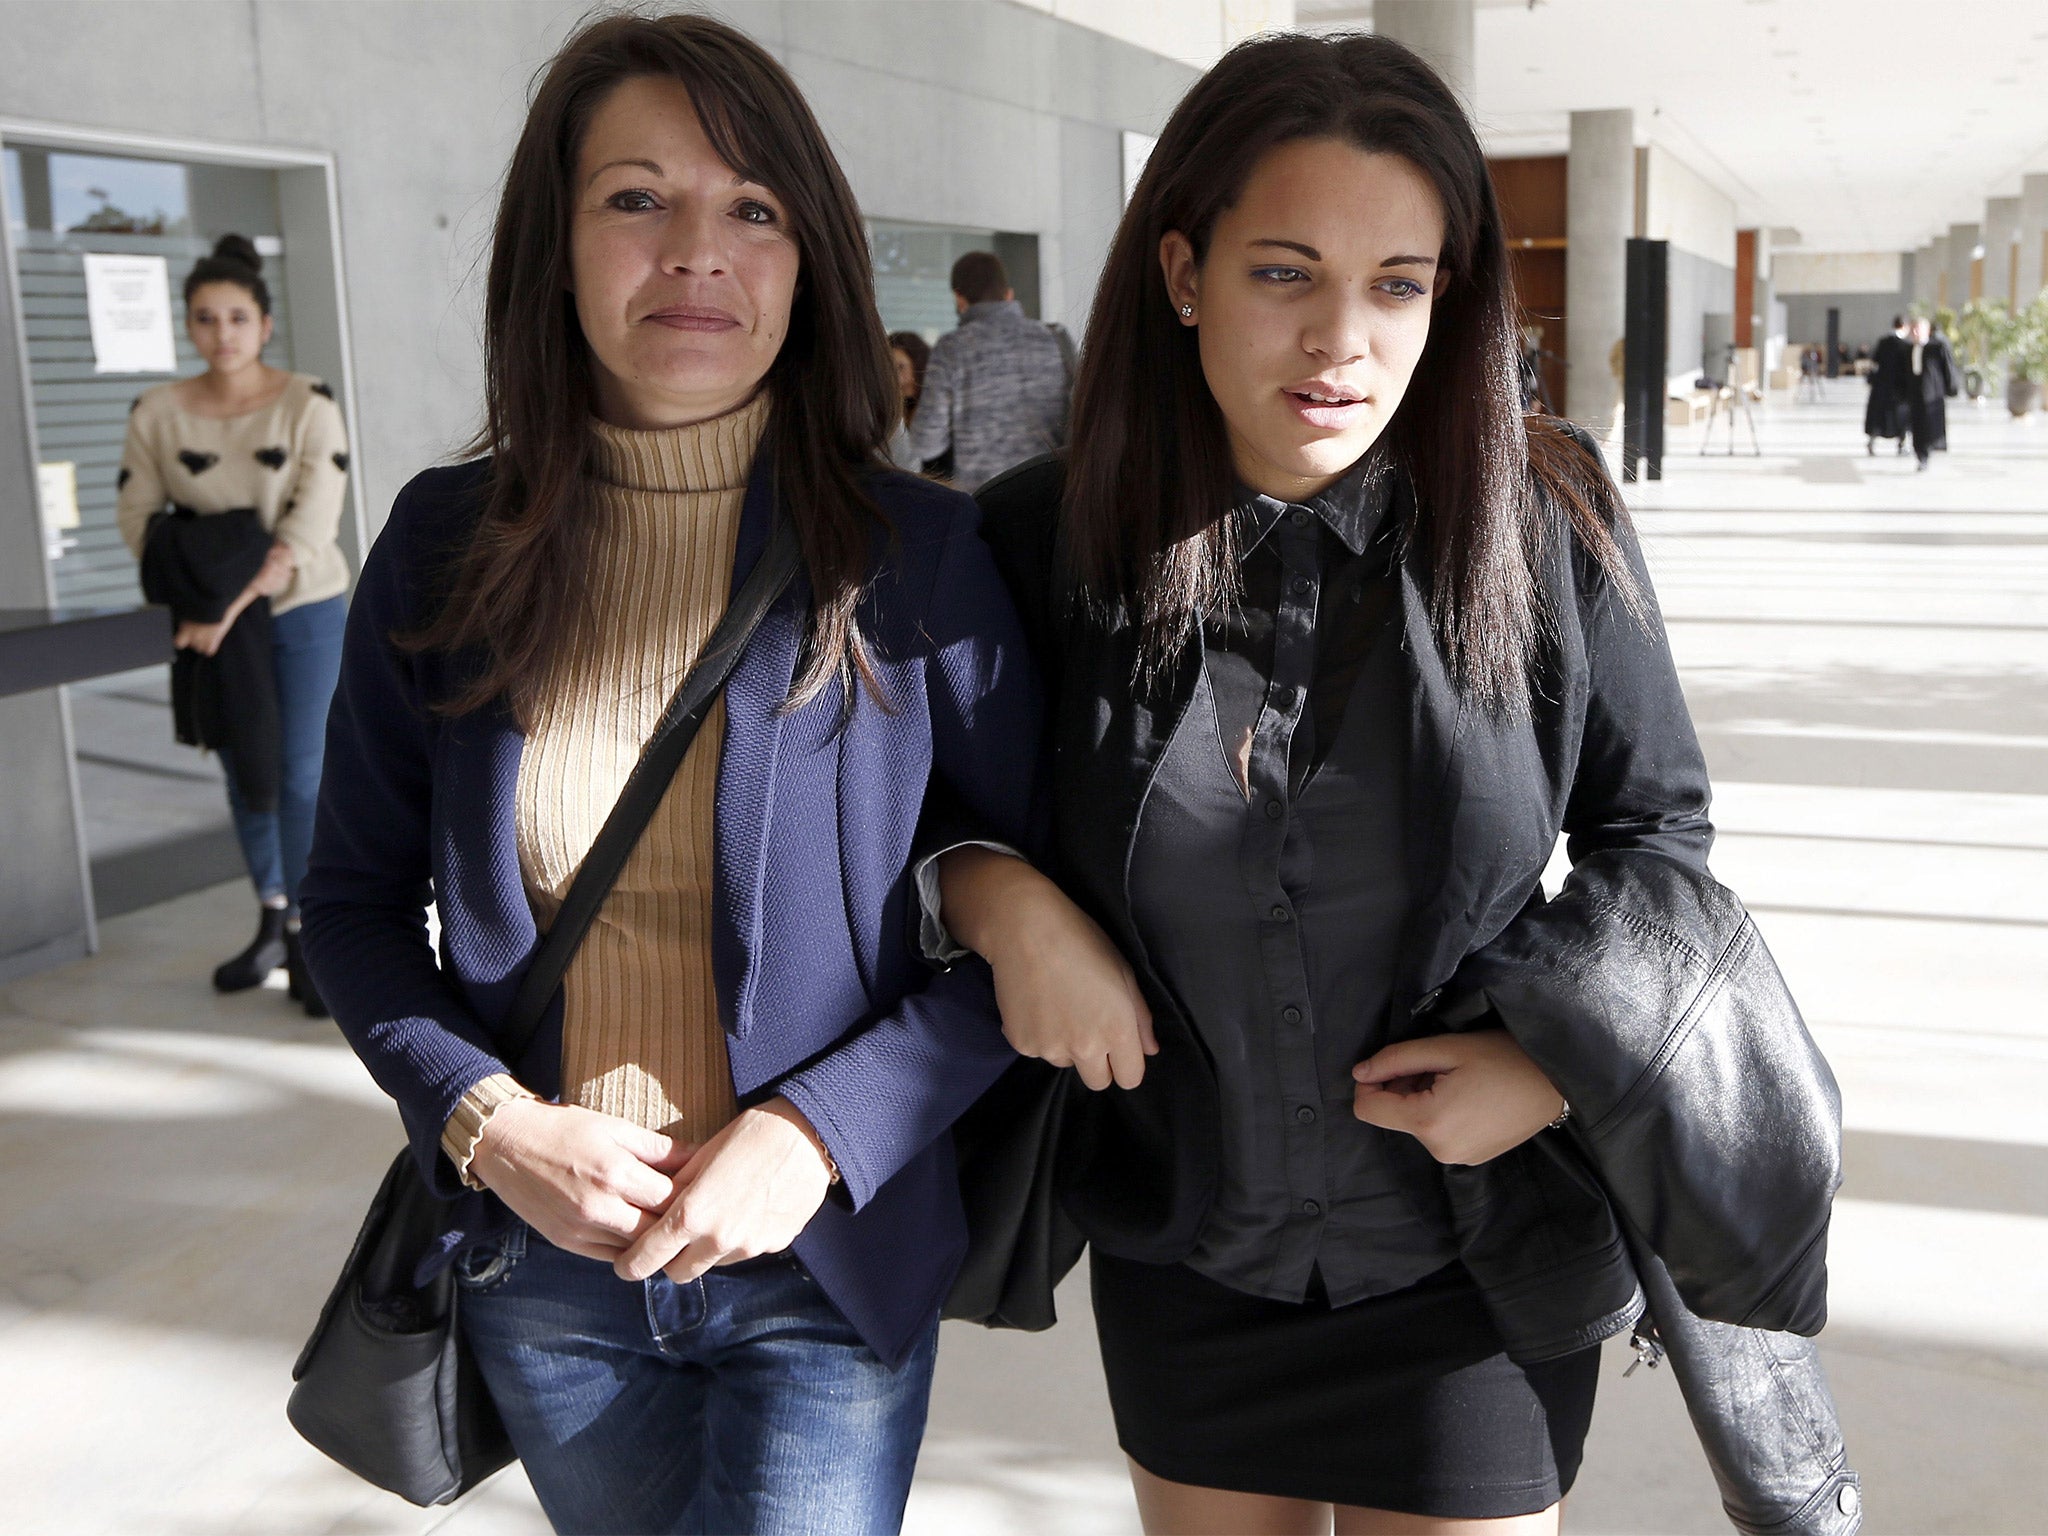 Sophie Serrano (left) and her daughter Manon Serrano leave court in Grasse, southern France, after a hearing for damages